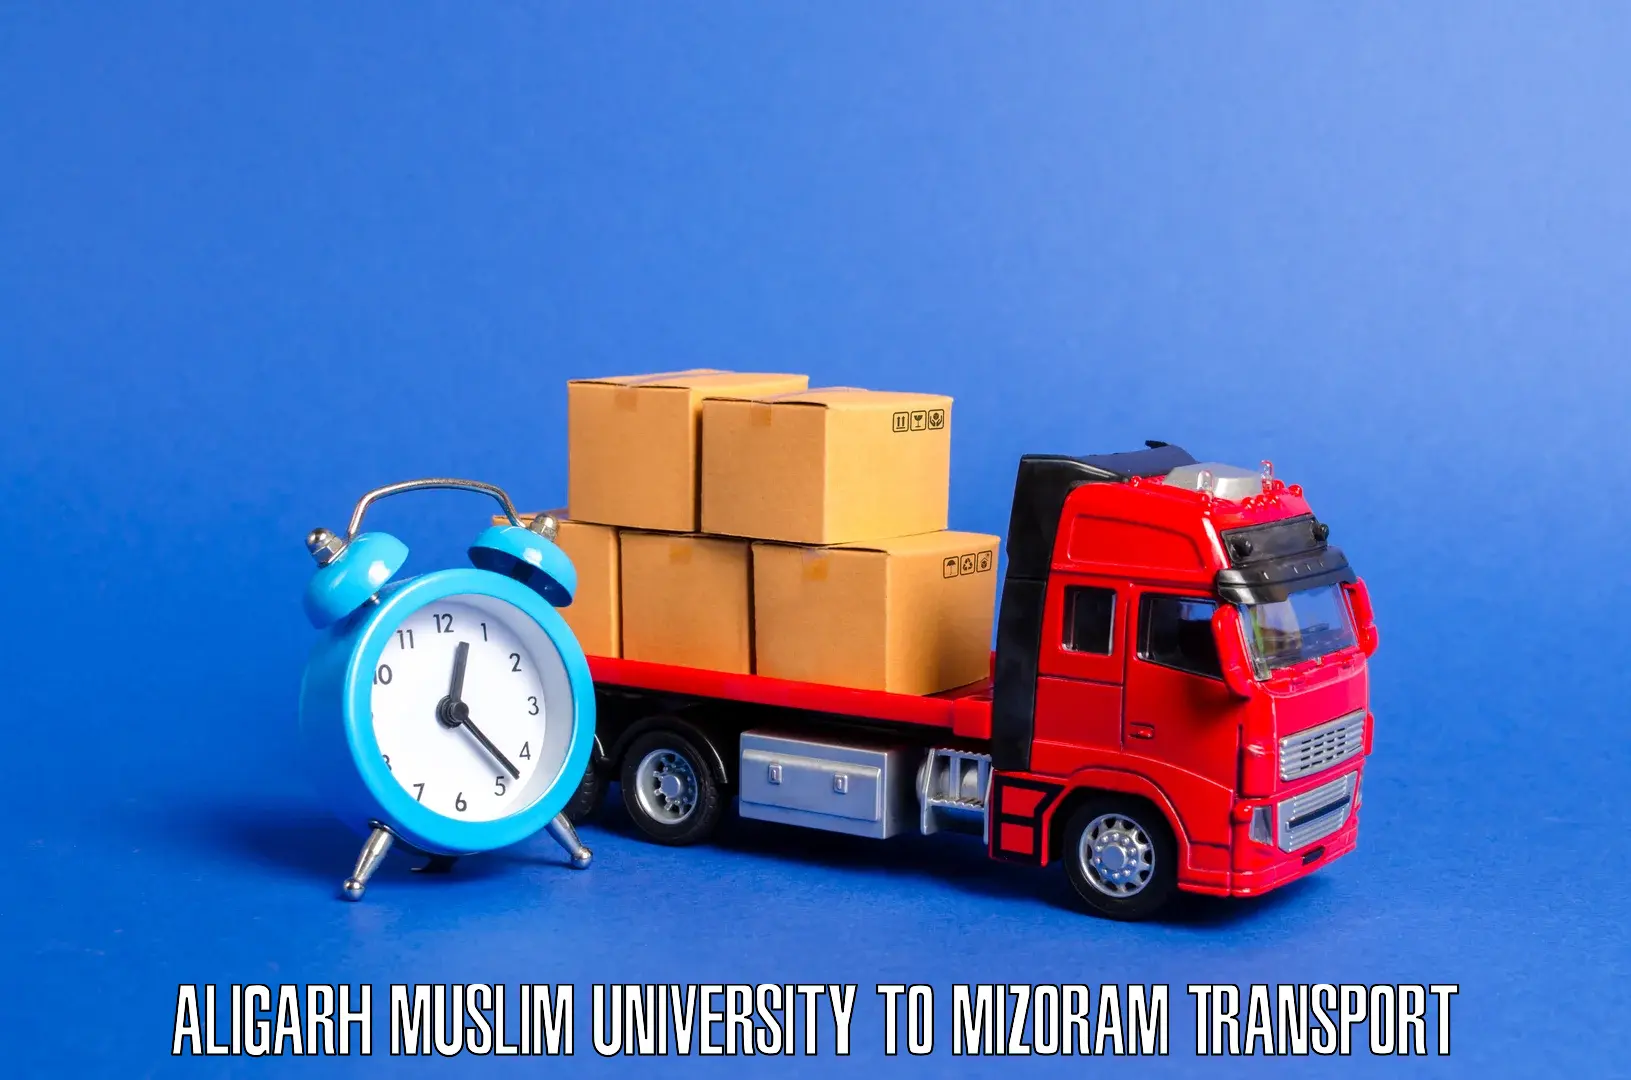 Daily parcel service transport Aligarh Muslim University to Darlawn